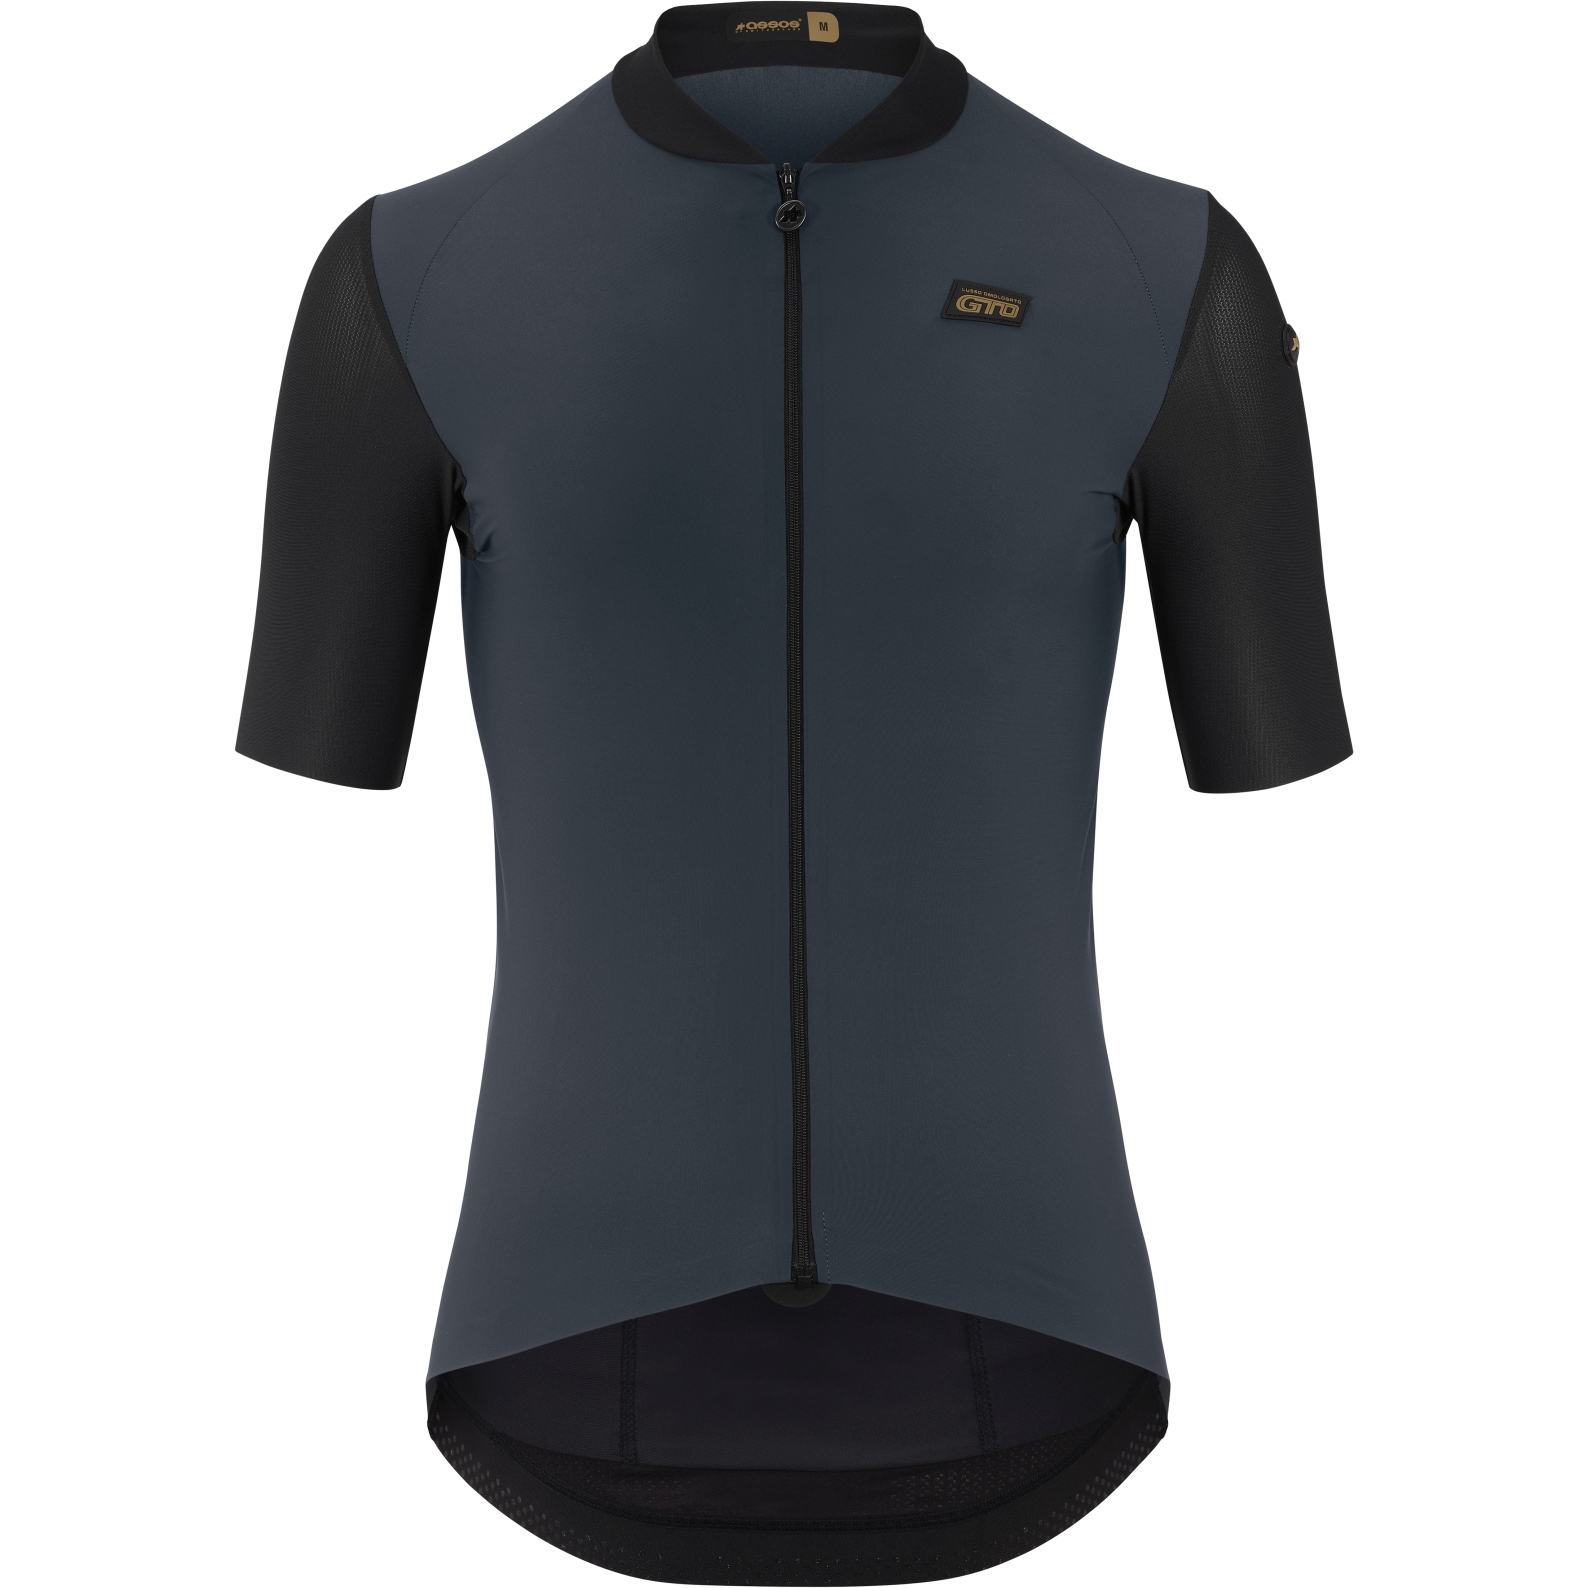 Picture of Assos Mille GTO Jersey C2 - kosimo granit